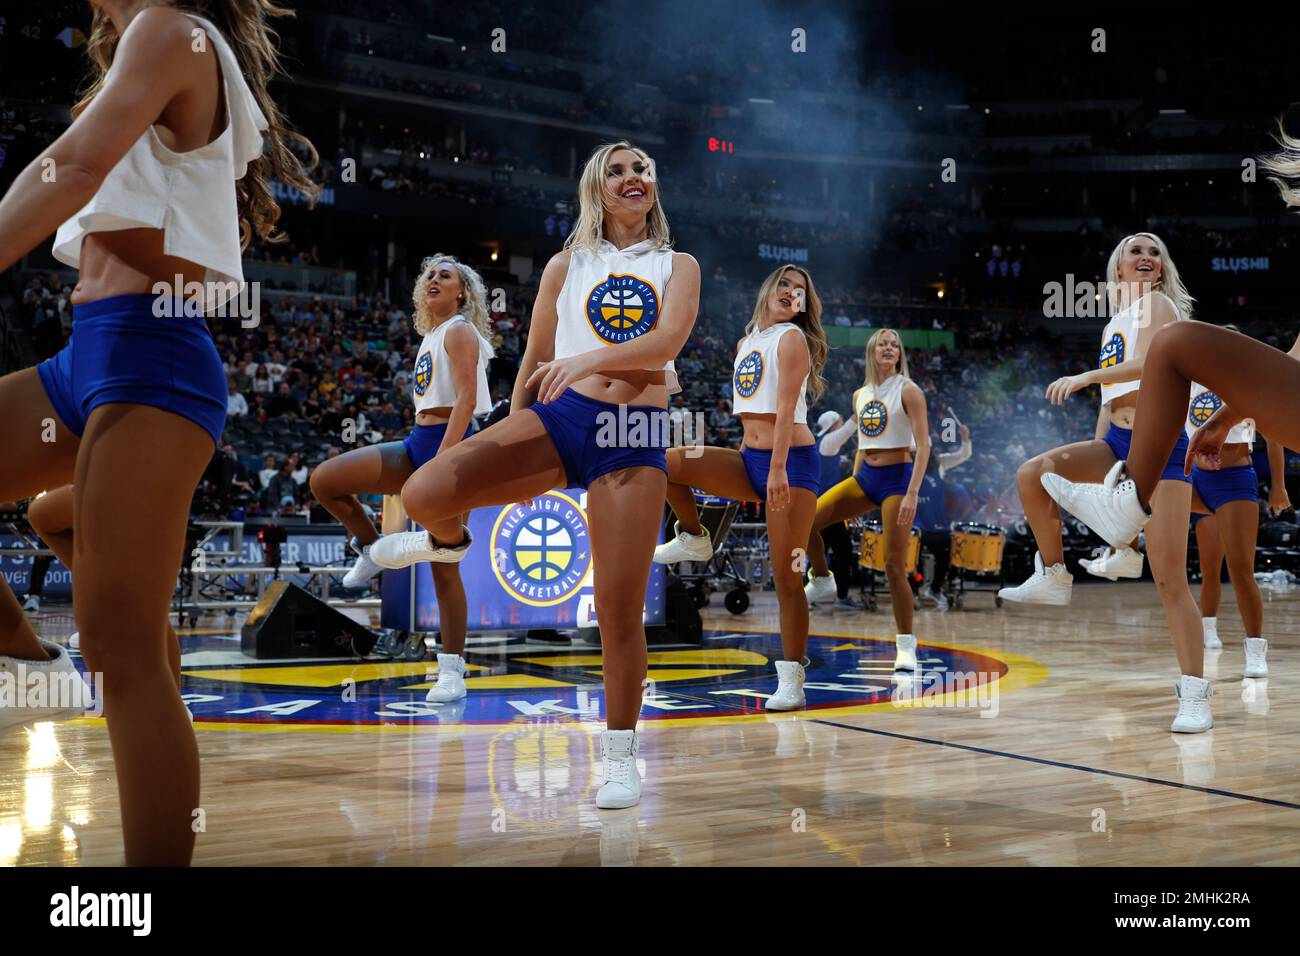 Denver Nuggets dance team performs in the second half of an NBA basketball game Friday, Nov. 8, 2019, in Denver. The Nuggets won 100-97. (AP Photo/David Zalubowski) Stock Photo